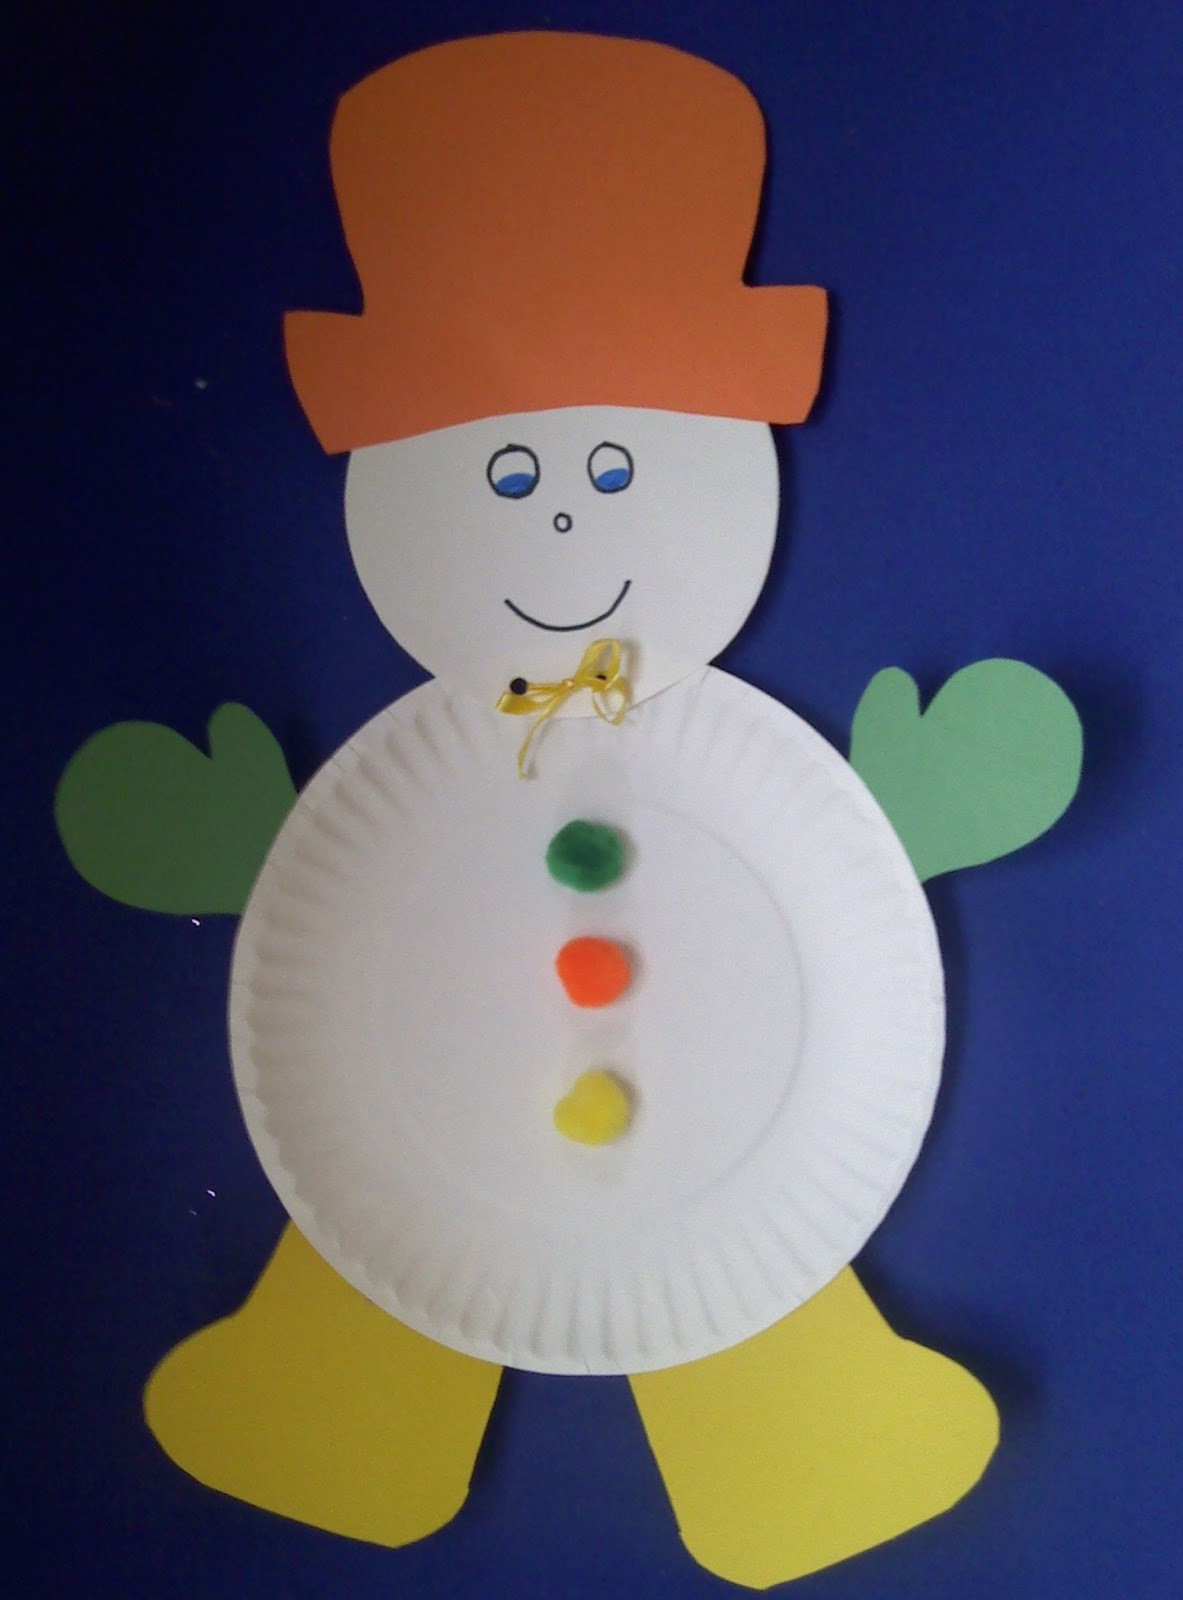 Arts And Crafts For Preschool
 Crafts For Preschoolers January 2012